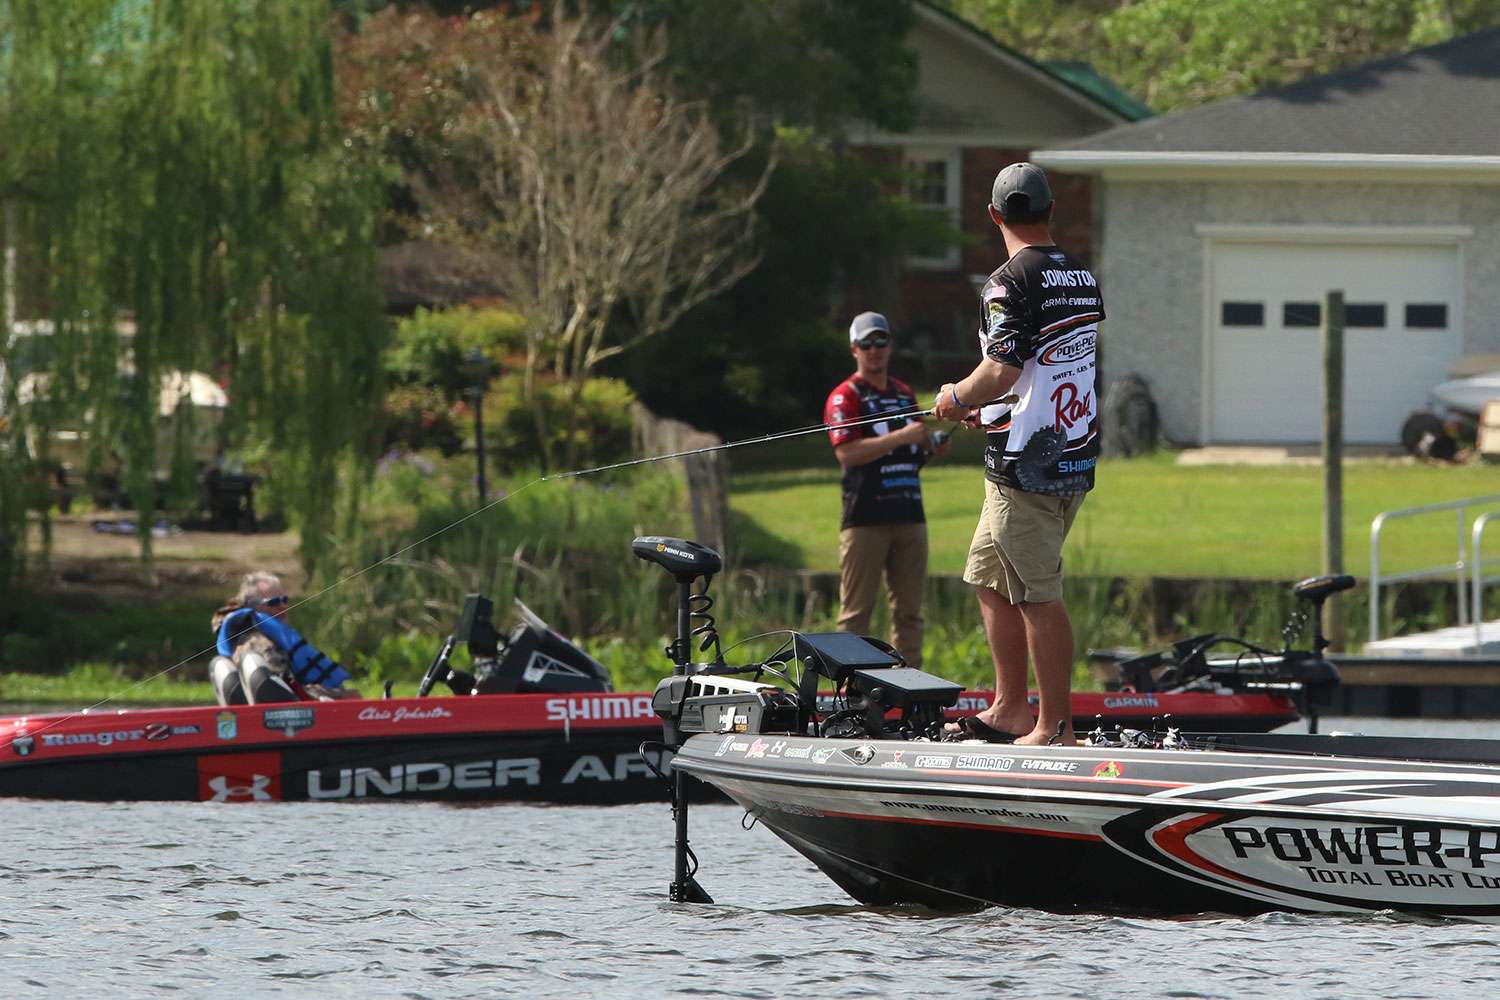 Take a look at John Crews' afternoon of fishing, along with a host of other anglers as they make the long run back to launch at the 2019 Bass Pro Shops Bassmaster Elite at Winyah Bay.